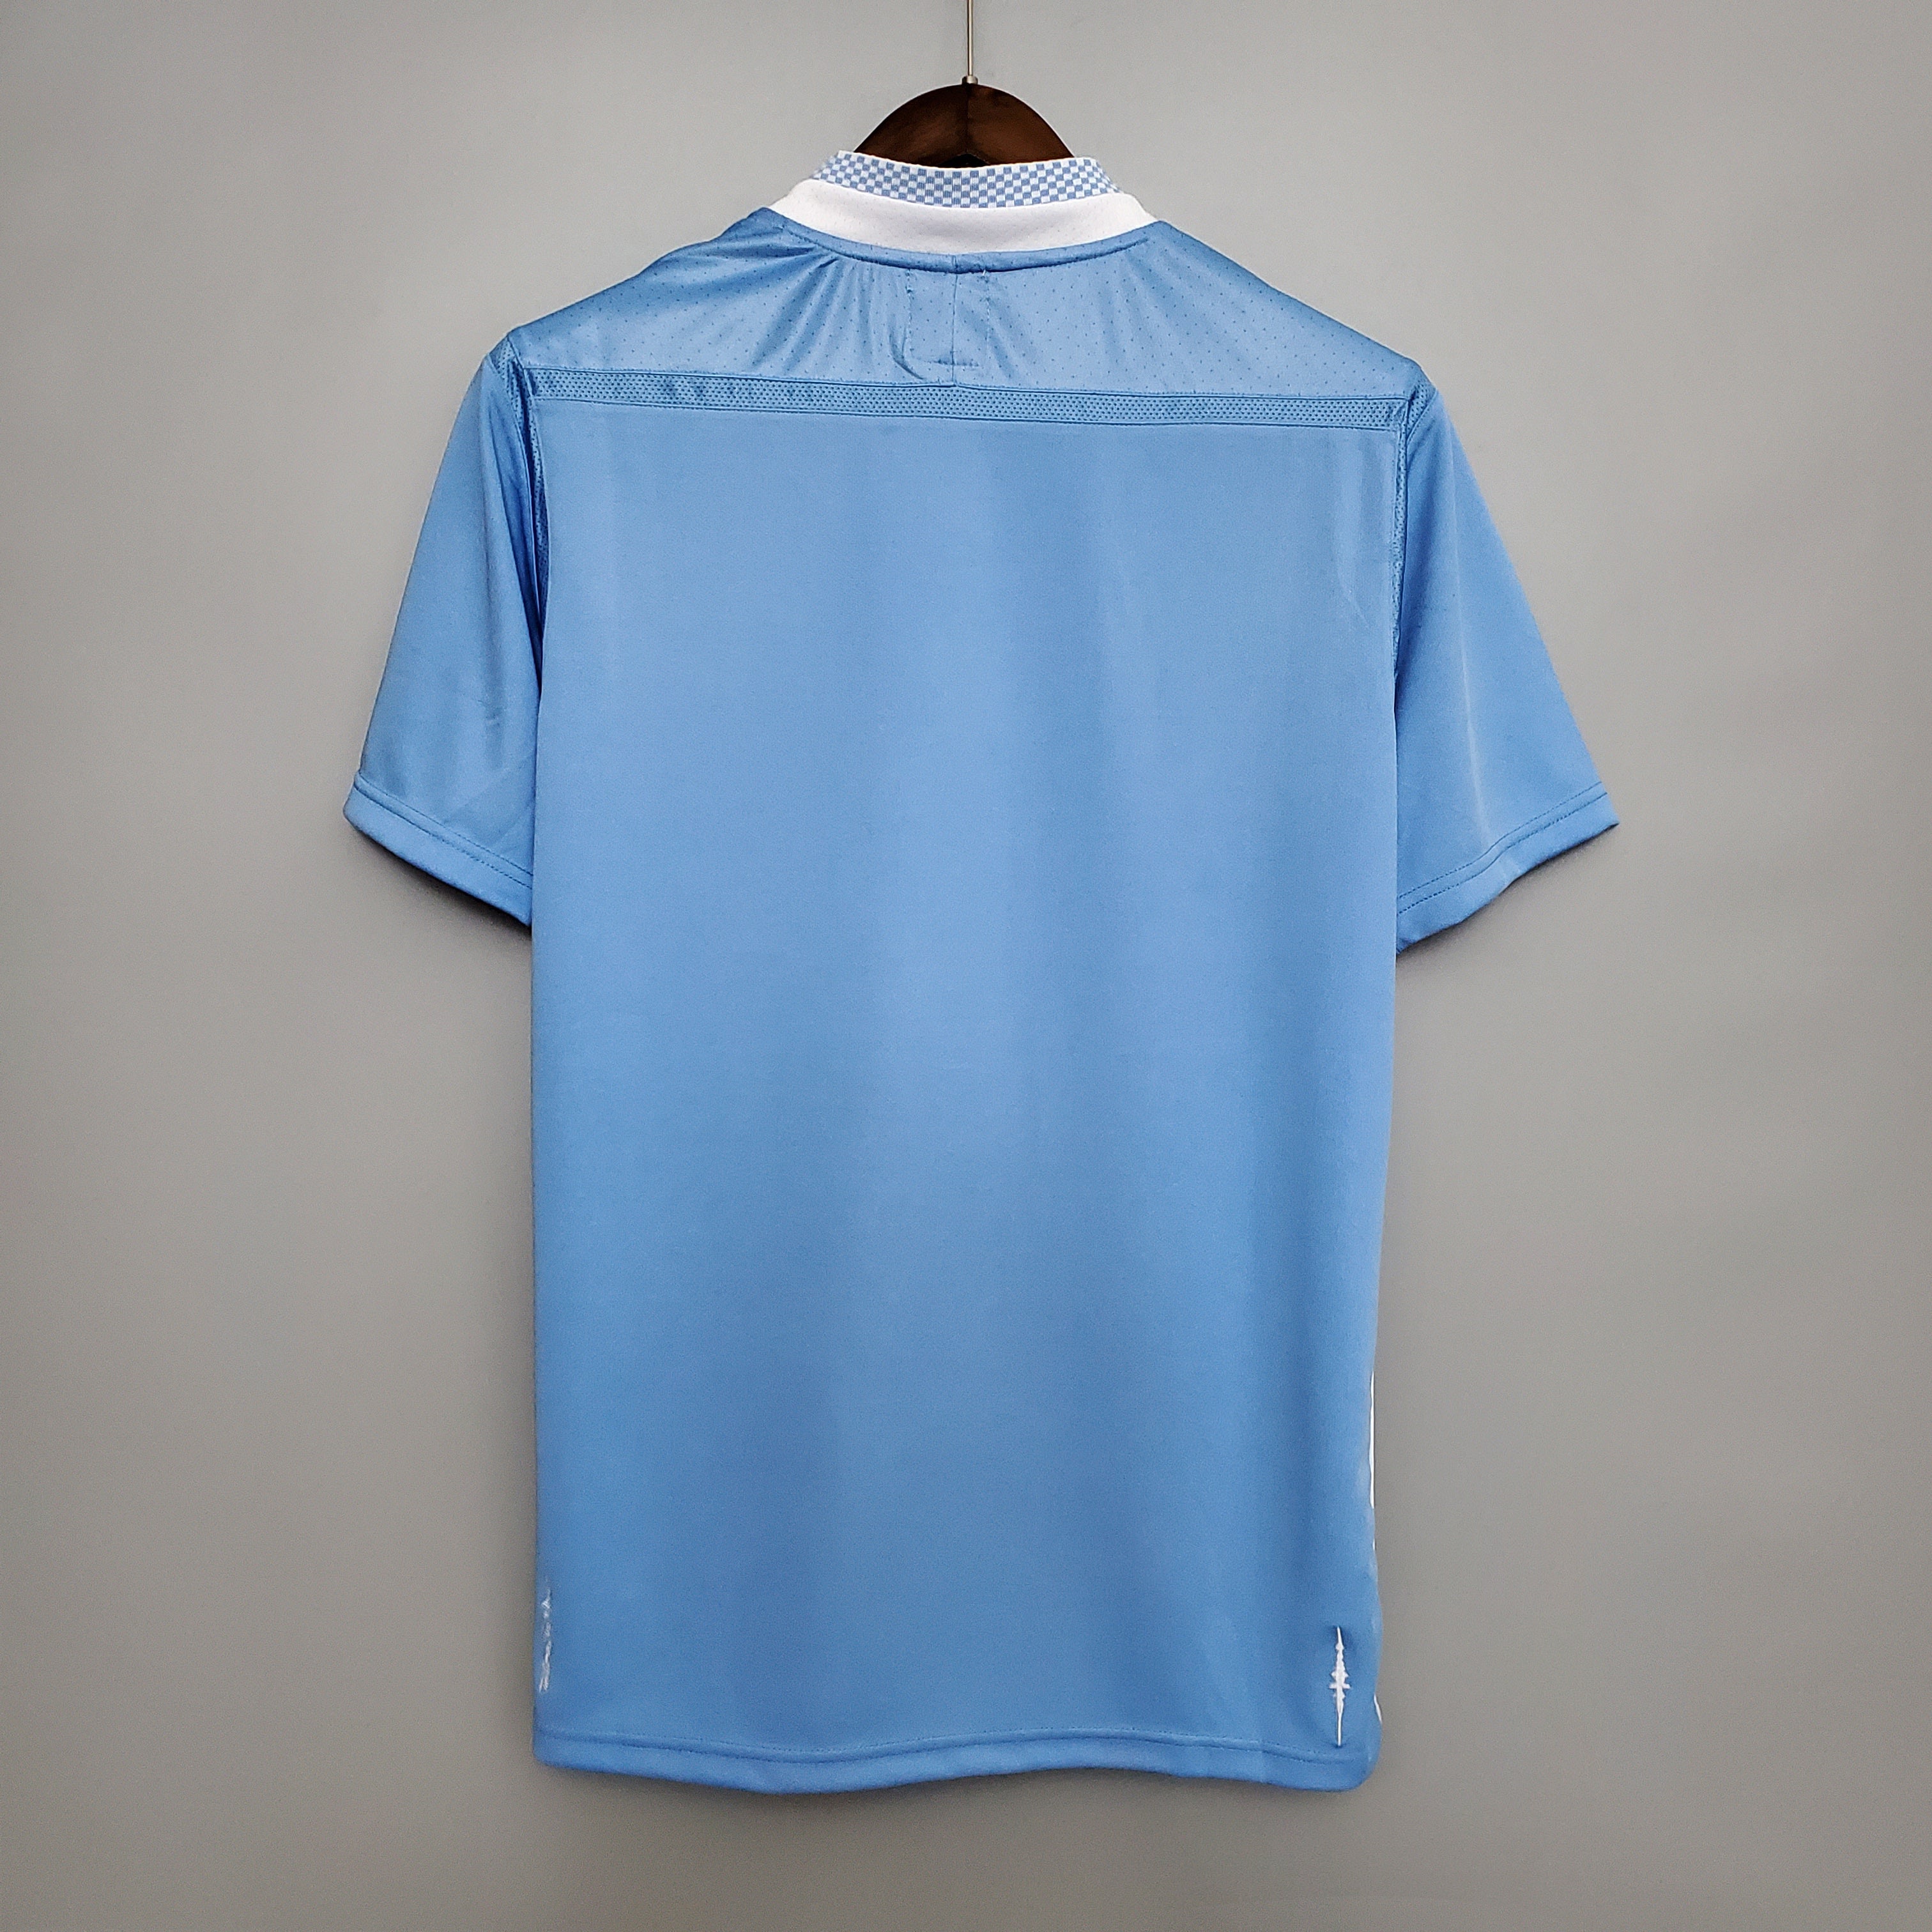 Manchester City 2011-12 Home Jersey